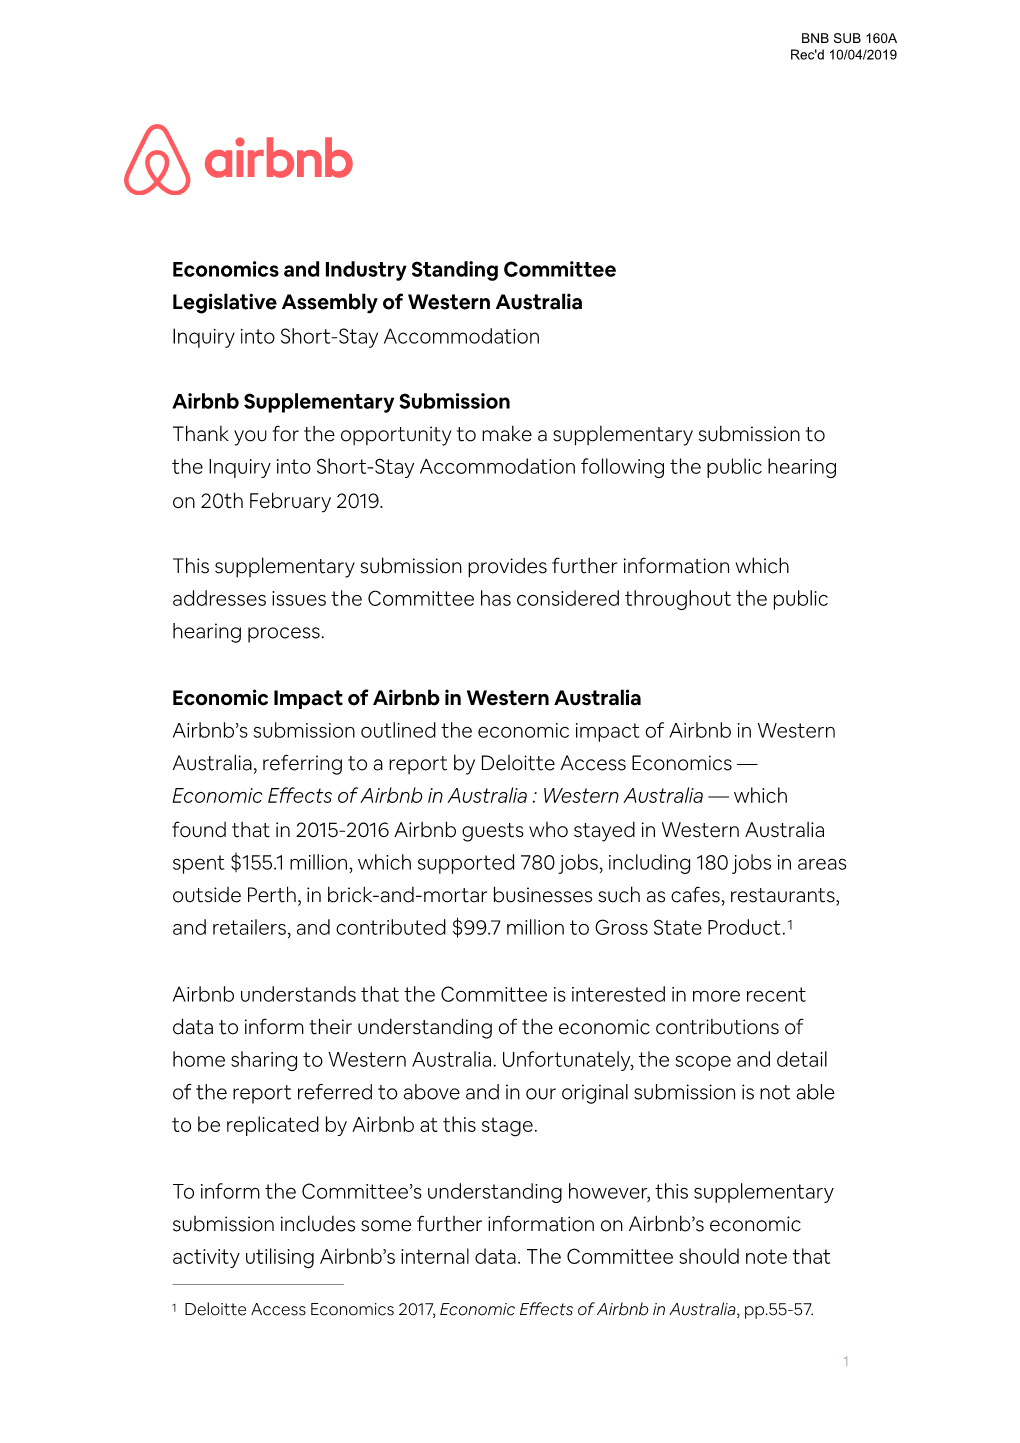 Airbnb Supplementary Submission | WA Economics and Industry Standing Committee